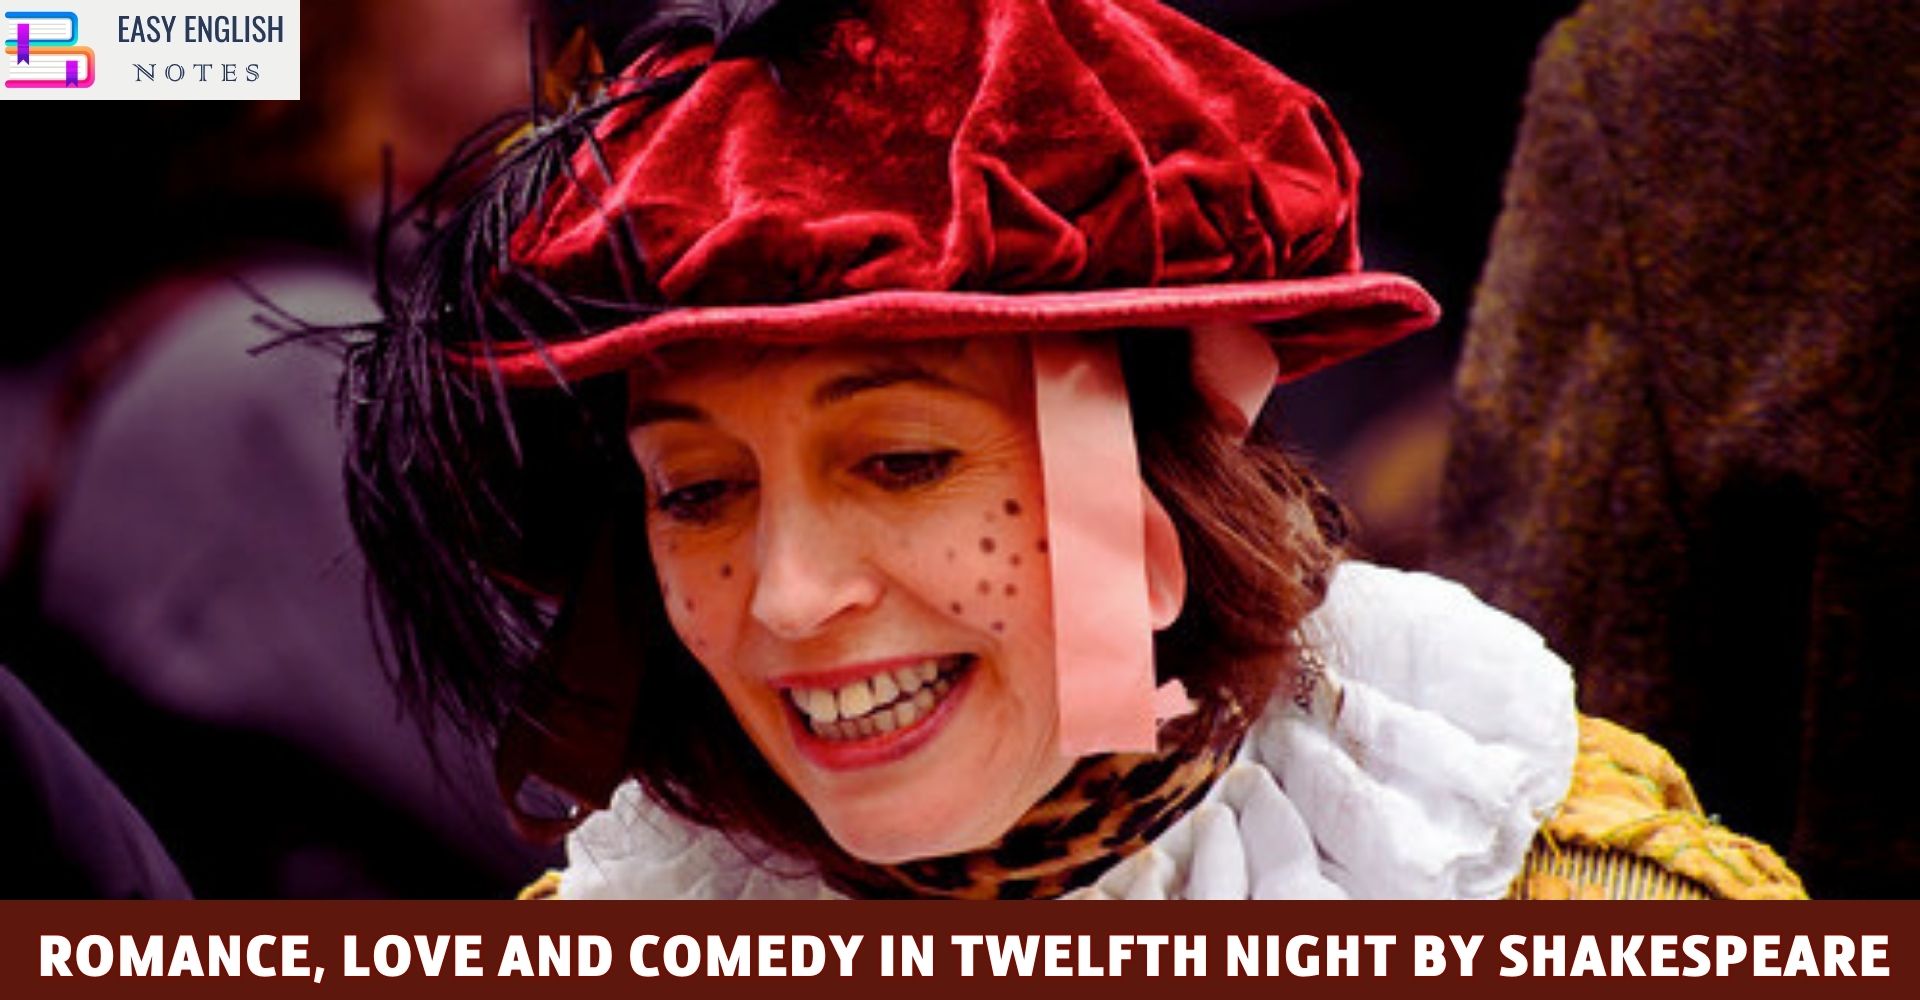 Romance, Love and Comedy in Twelfth Night by Shakespeare